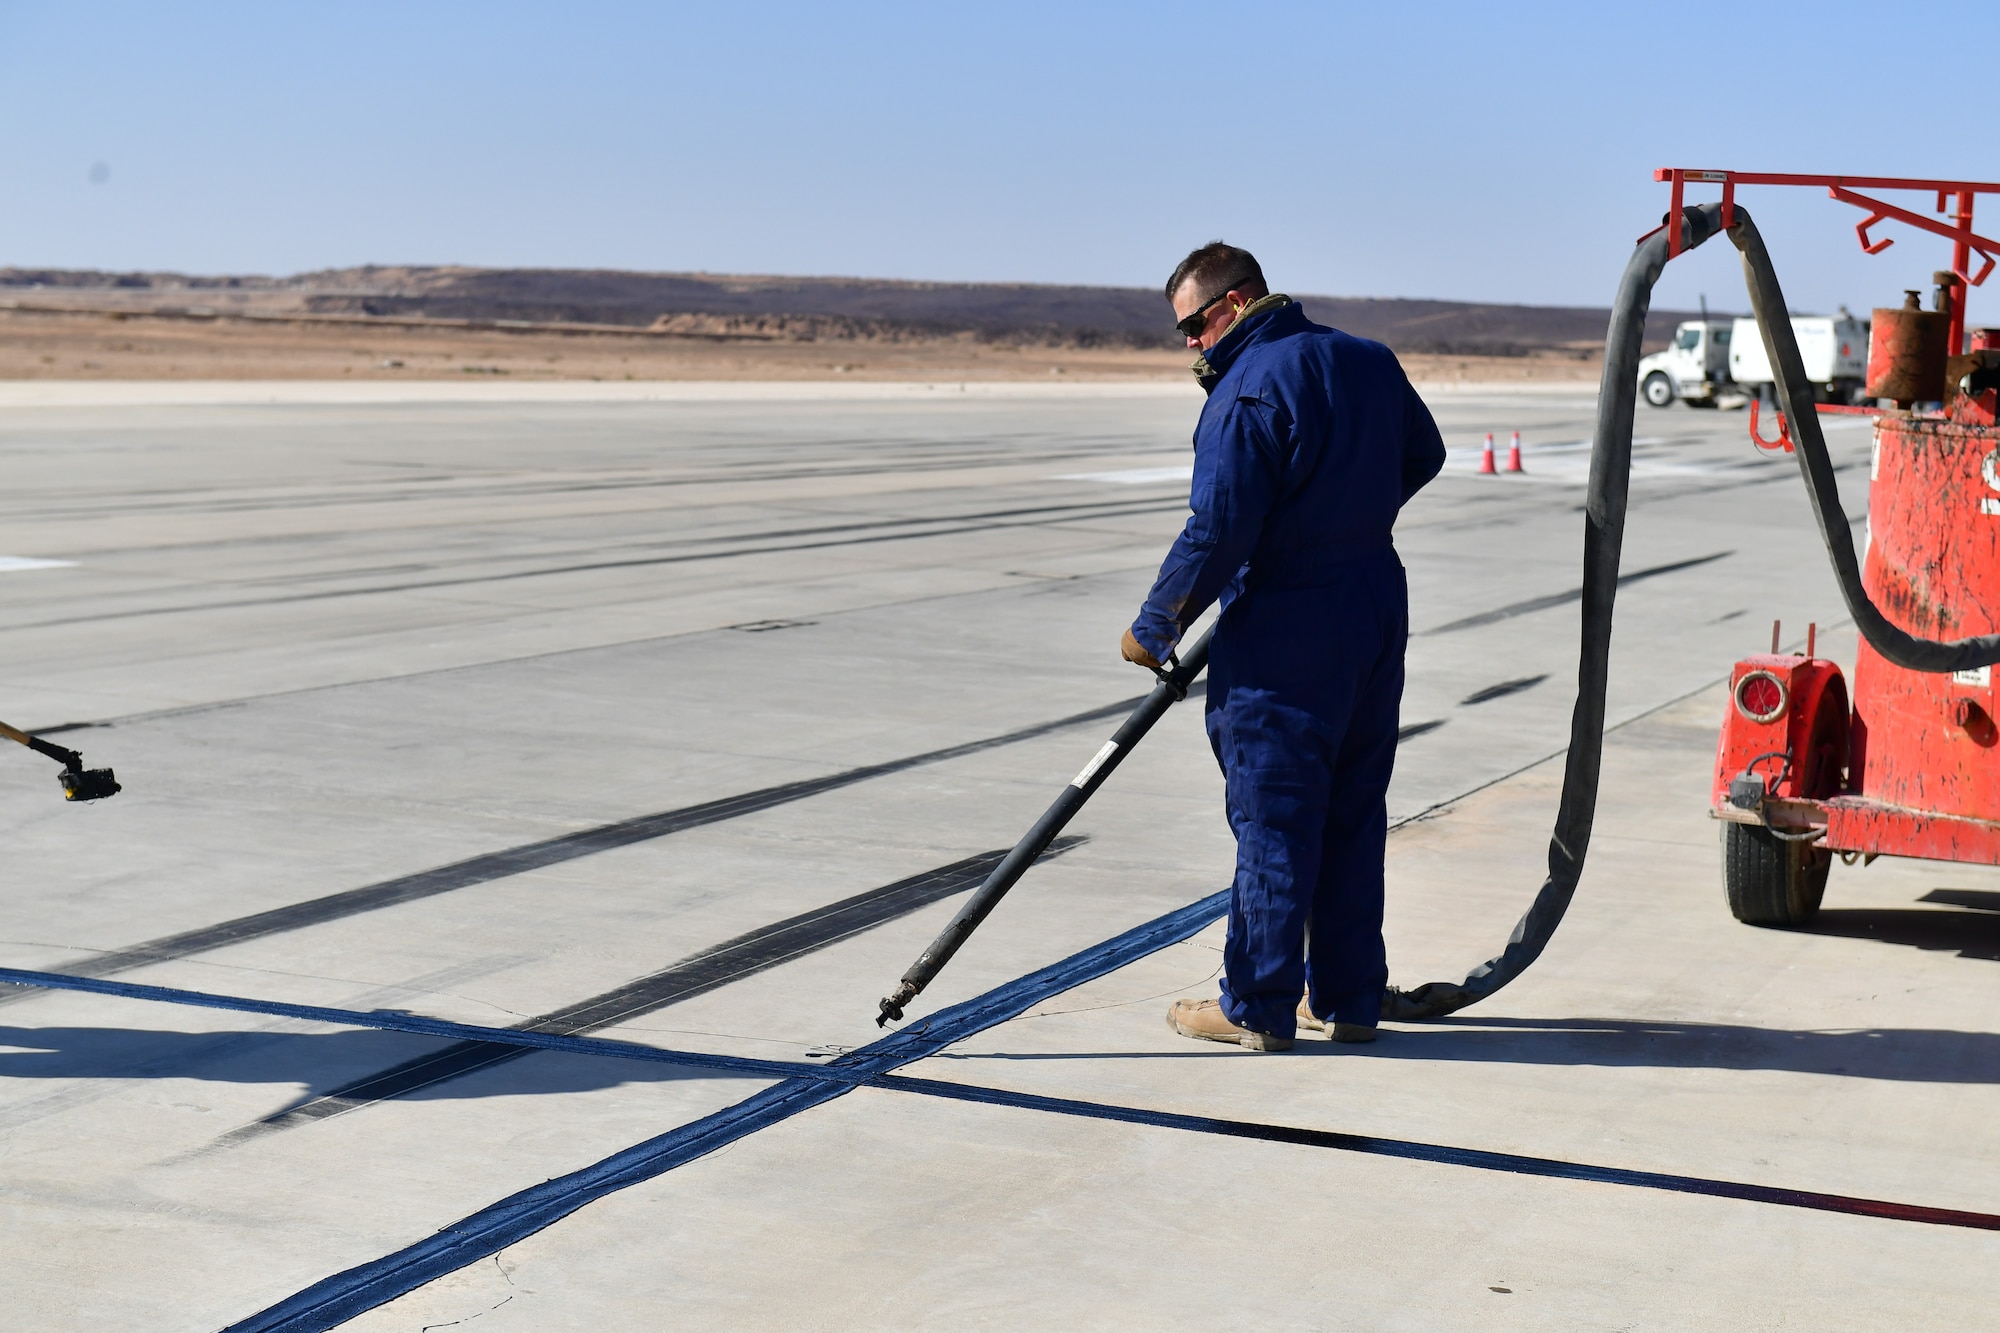 When a 130,000 pound aircraft touches down, it makes an impact. And no matter how good your surface is, over time, everything wears down. So when the 332d Air Expeditionary Wing starts to see cracks in the flight line, they call the 332d Expeditionary Civil Engineer heavy repair flight.